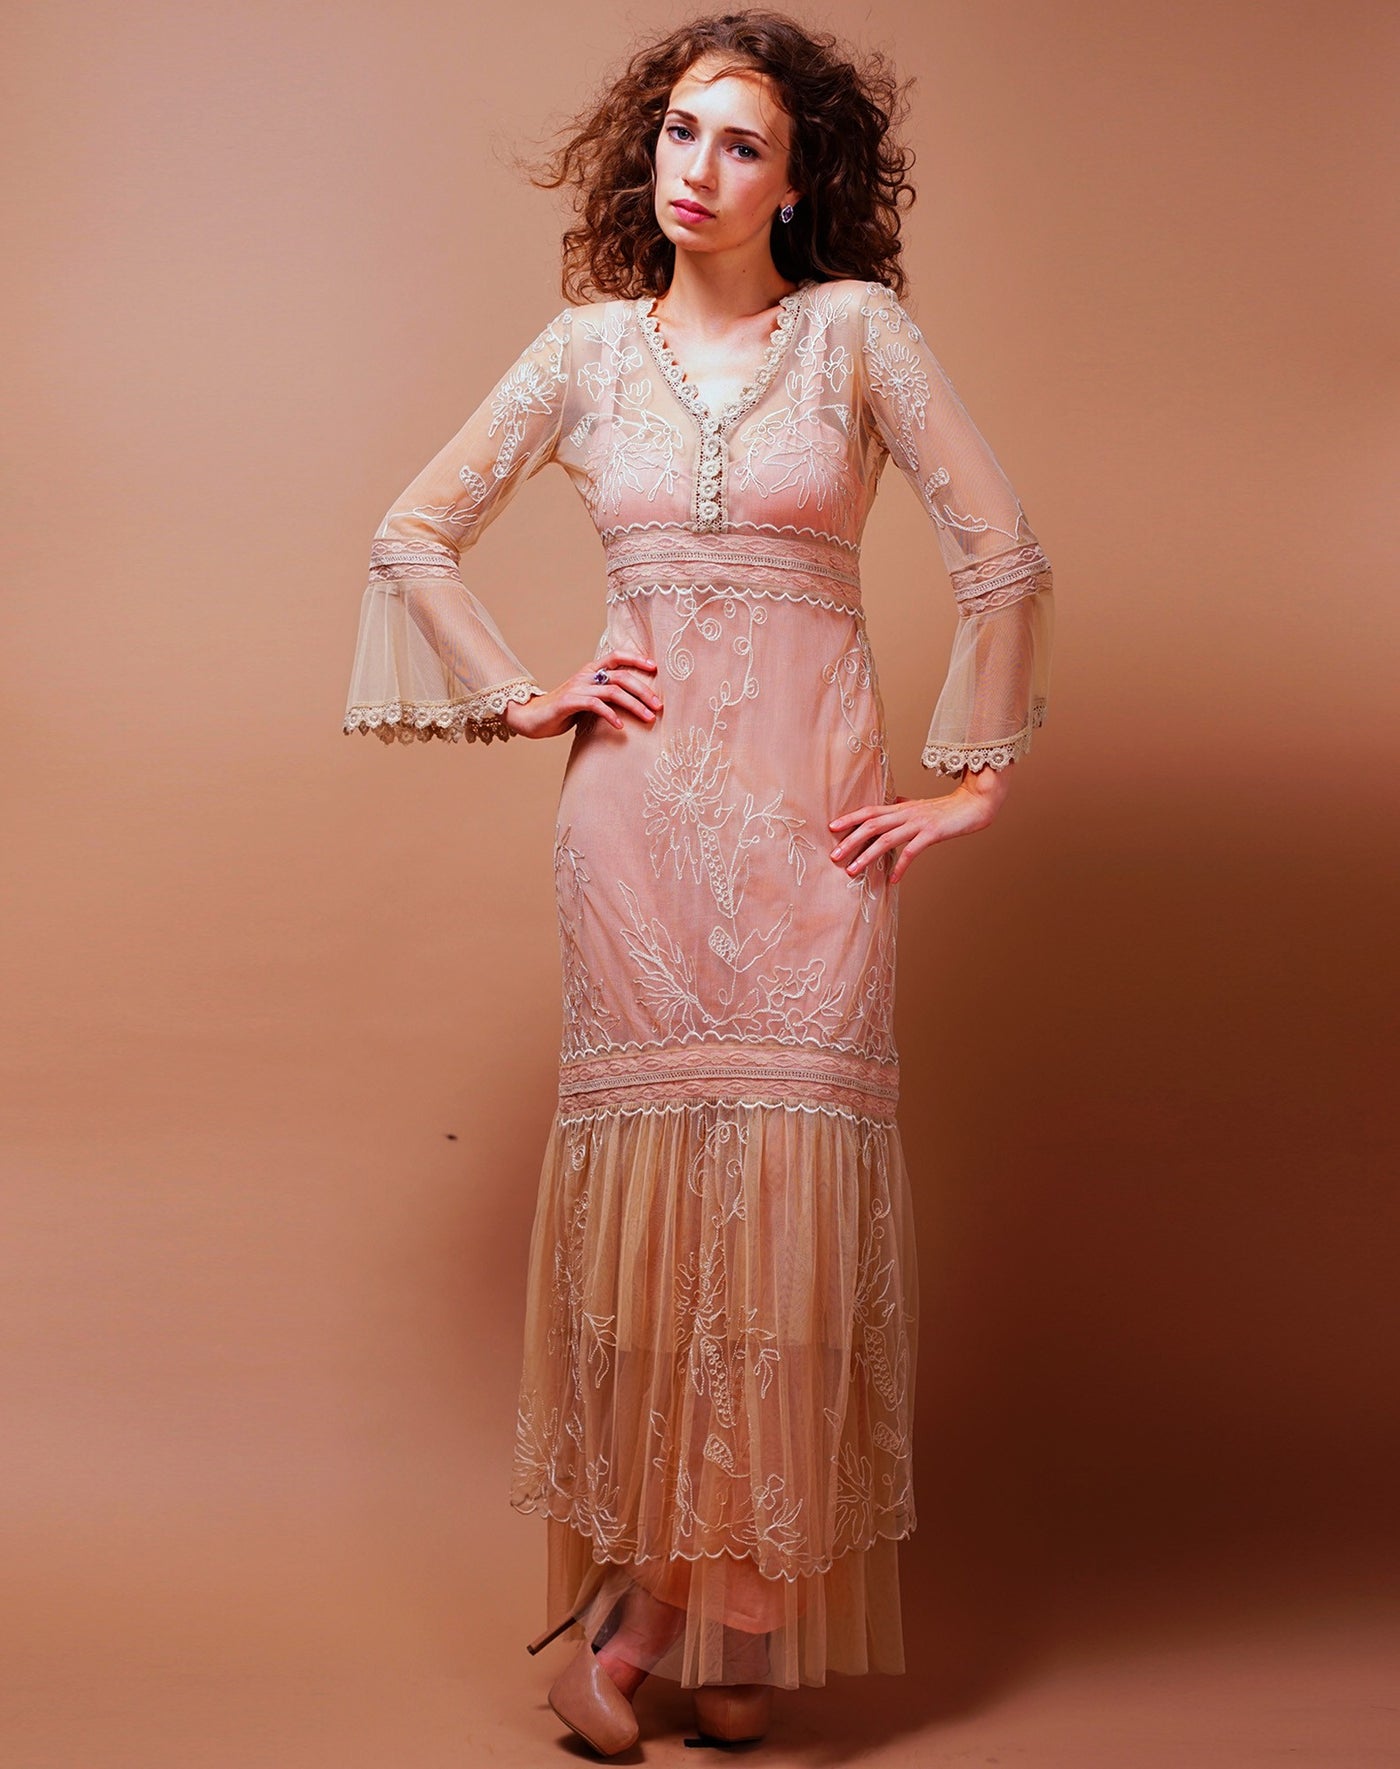 Titanic Empire Waist Wedding Dress in Pink-Champagne by Nataya - SOLD OUT